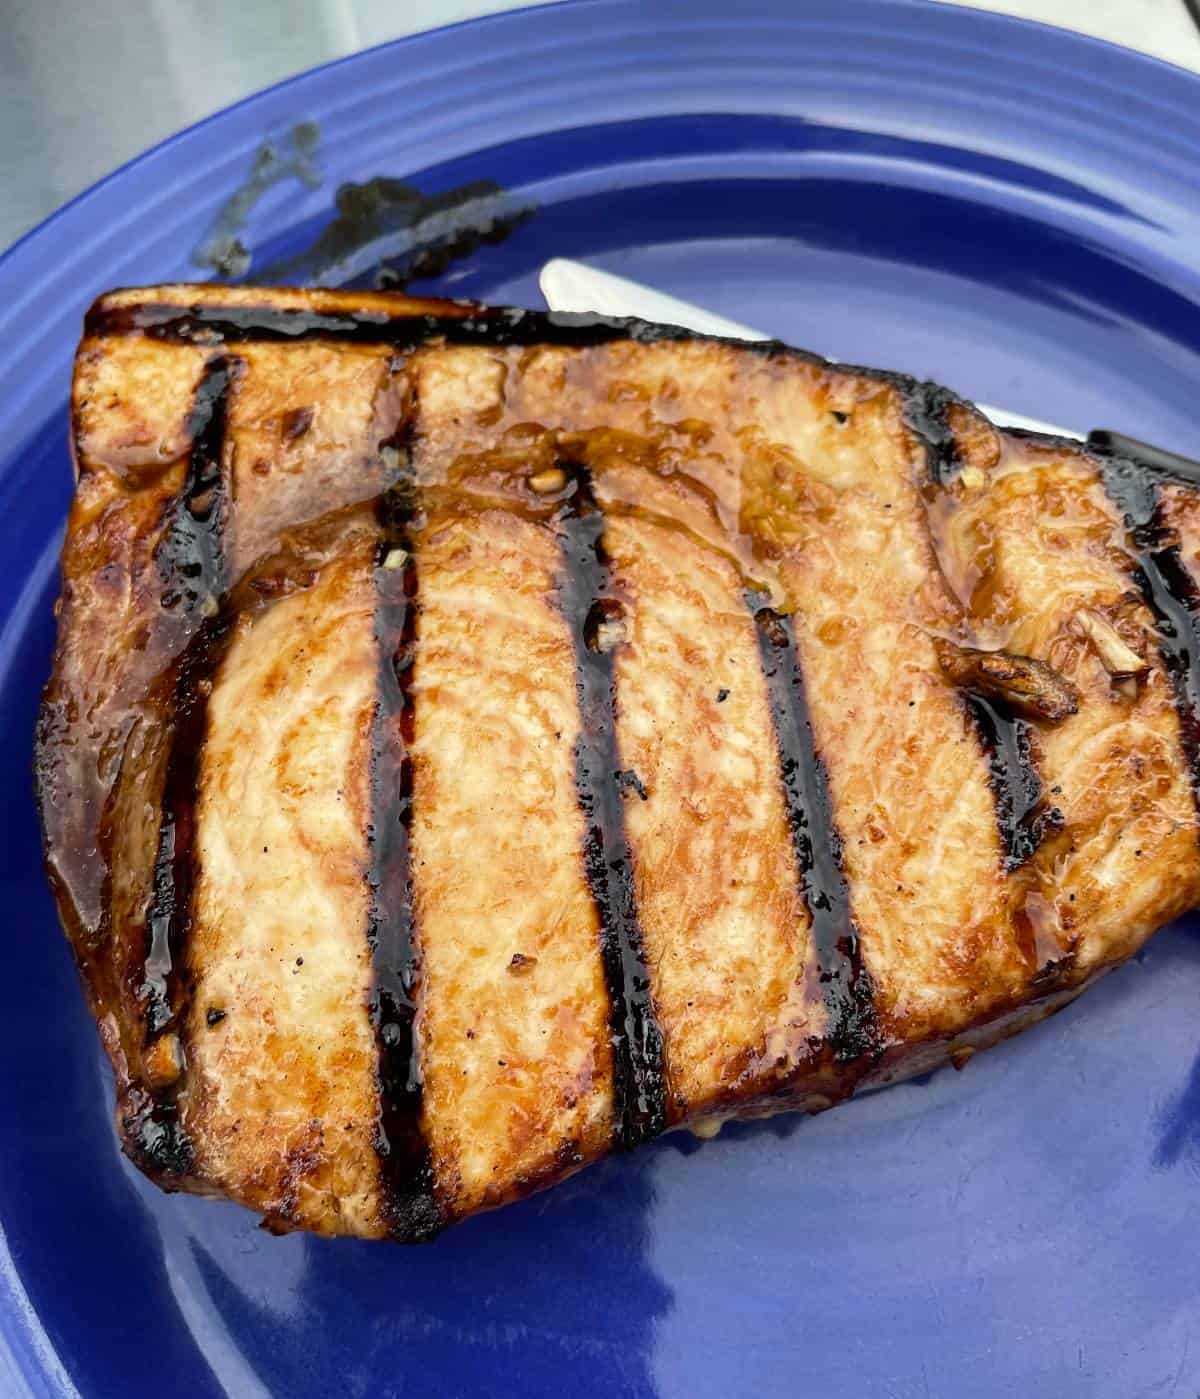 grilled swordfish resting on a blue plate before serving.